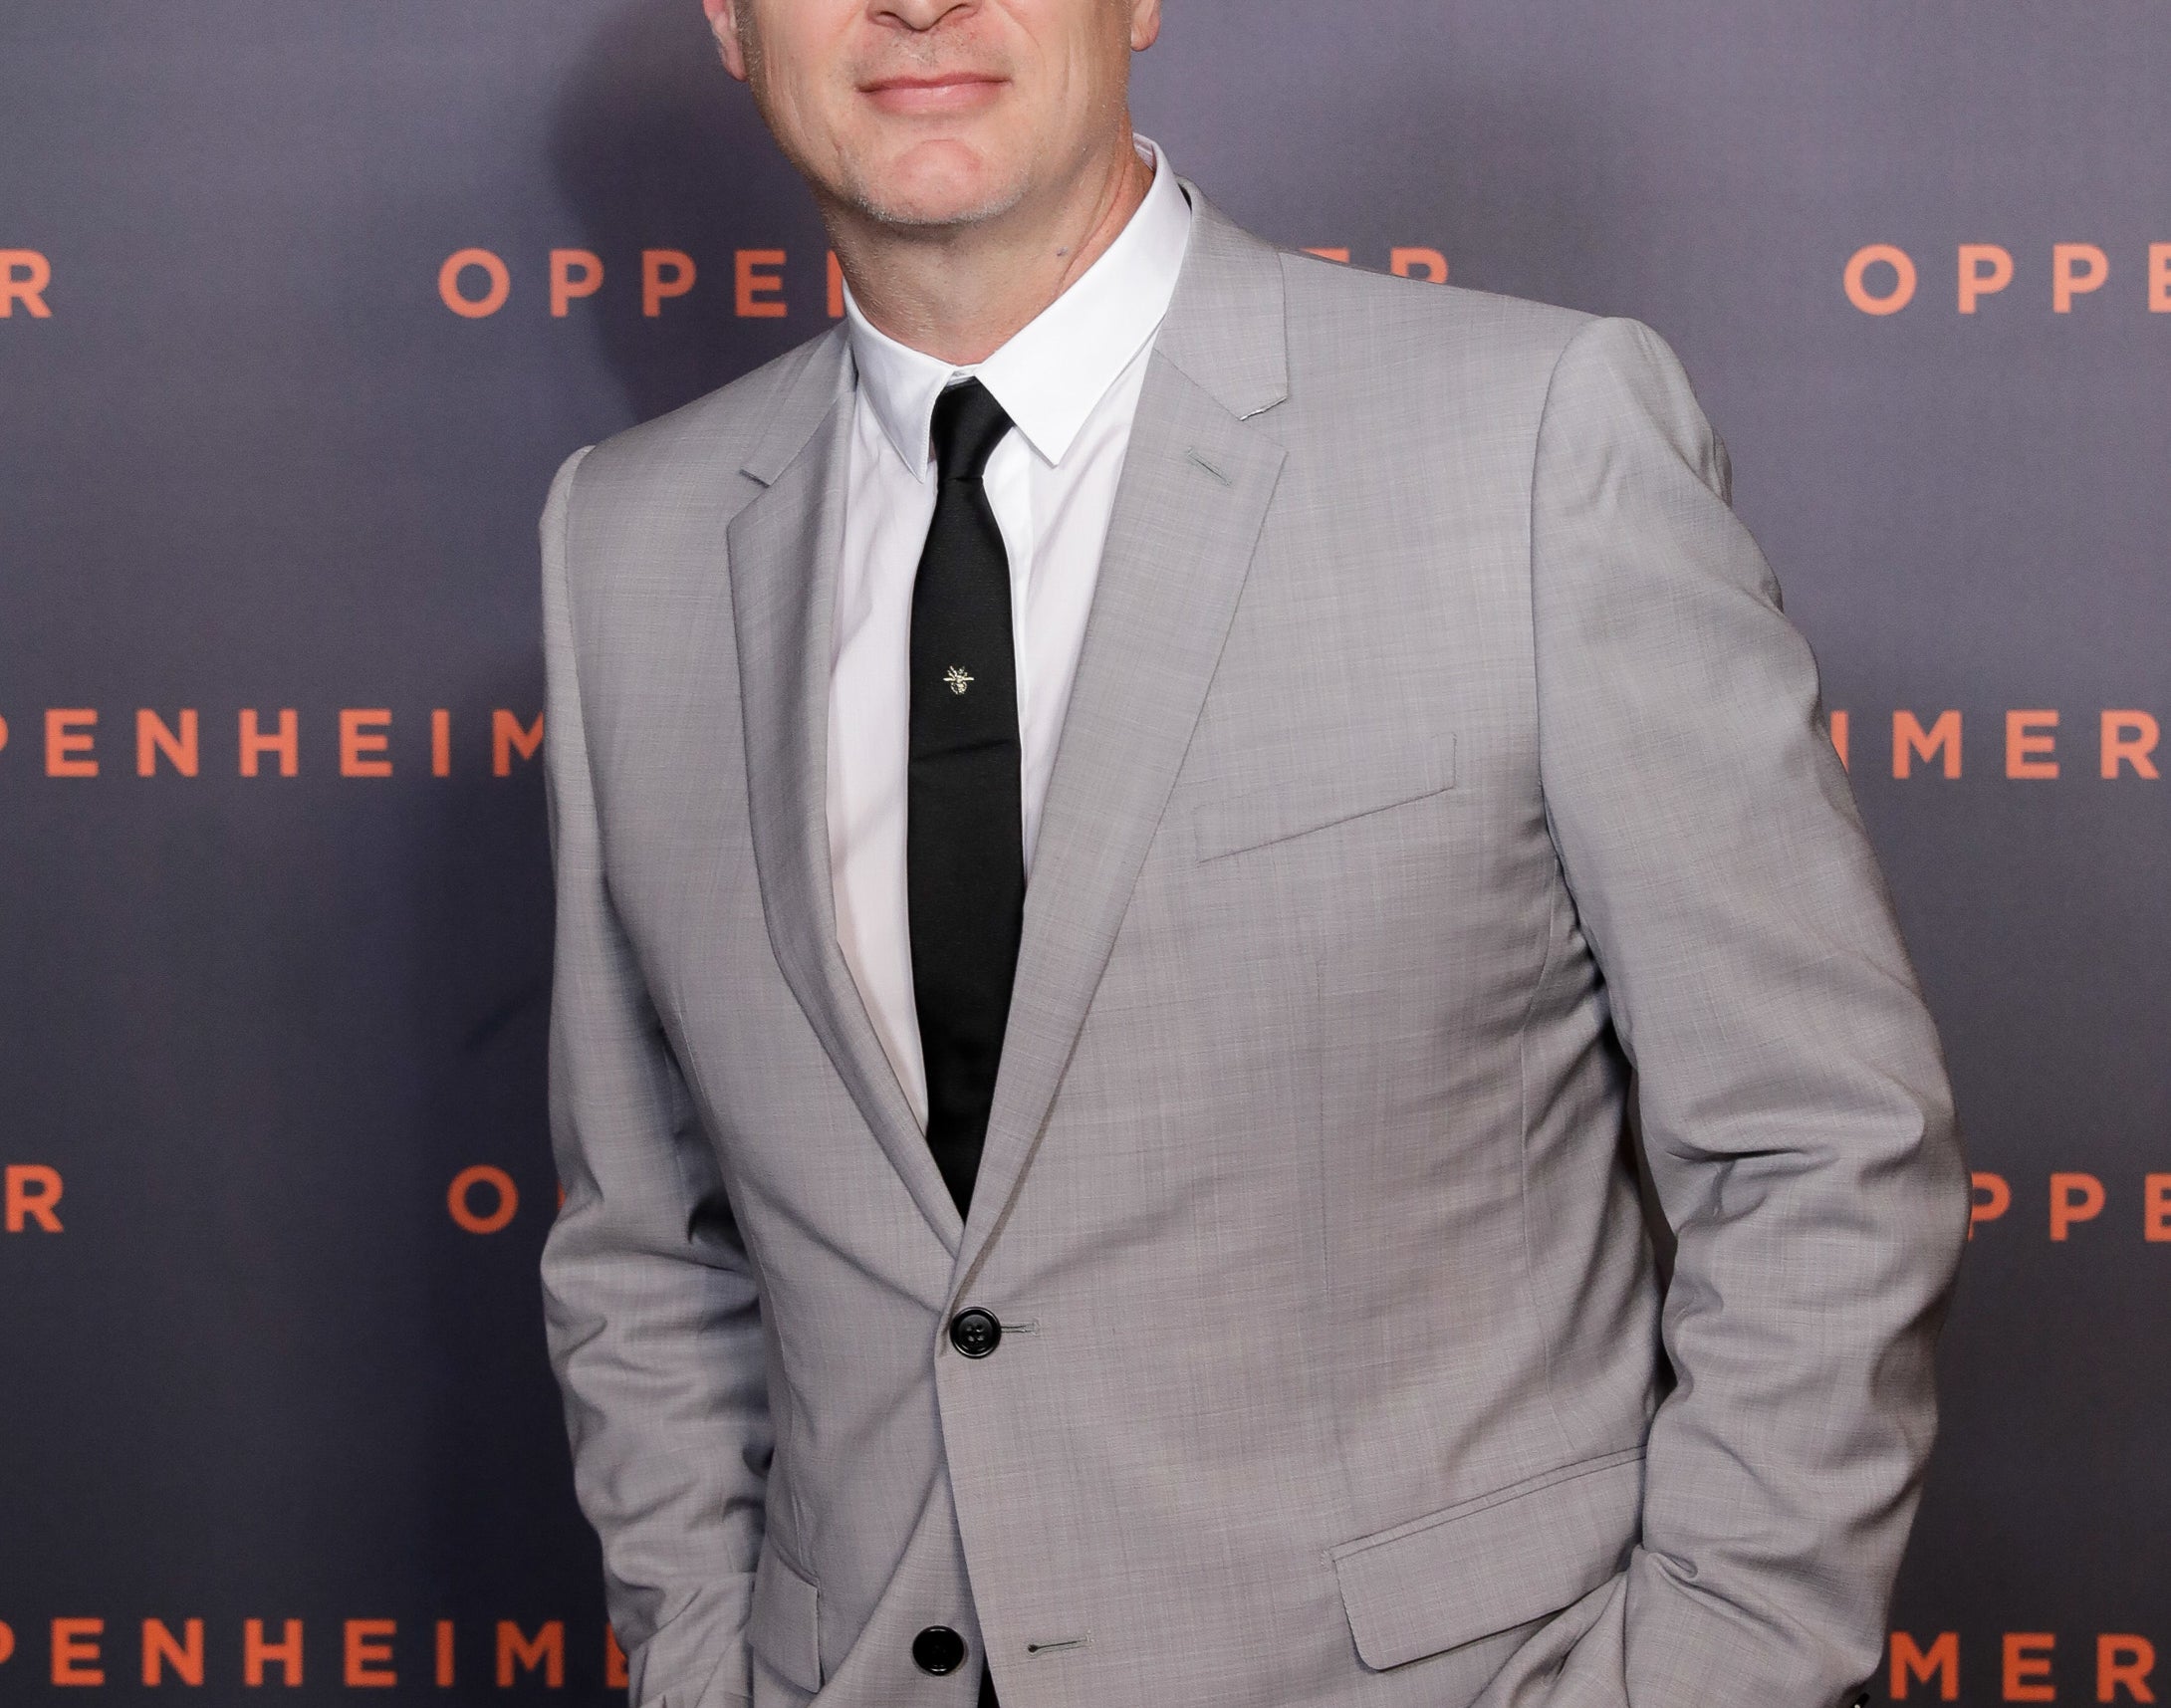 A close-up of Christopher in suit and tie at a media event